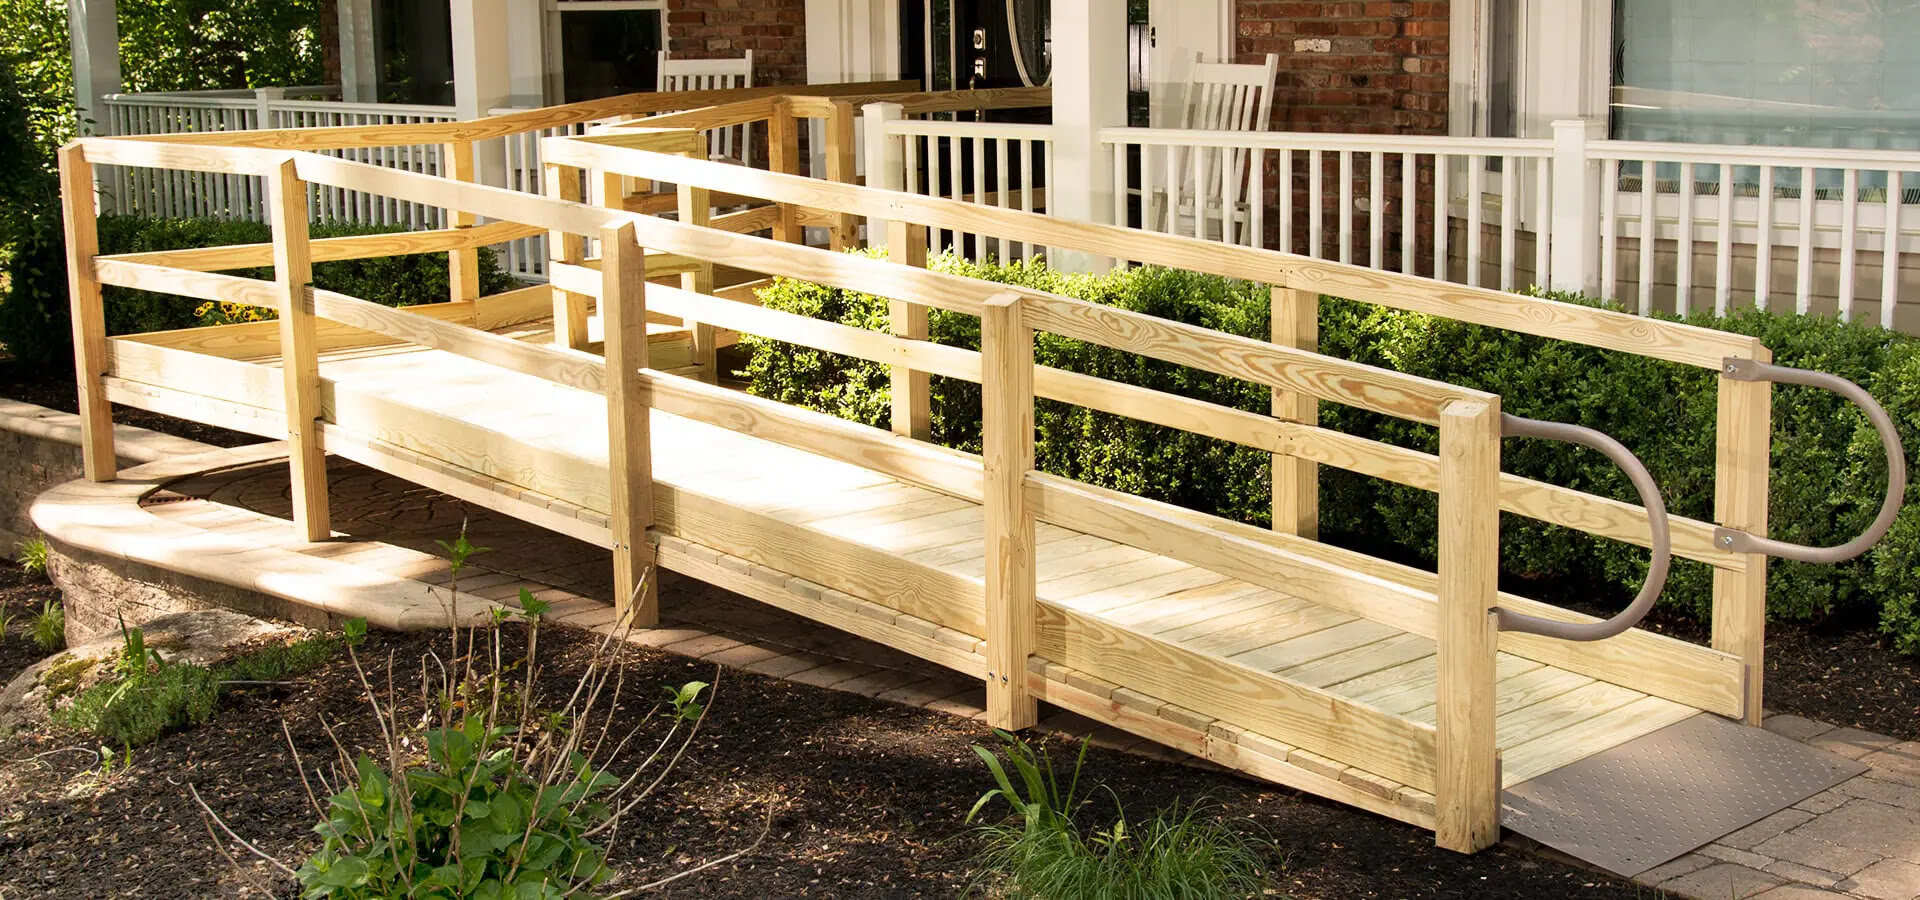 How To Build A Porch Ramp